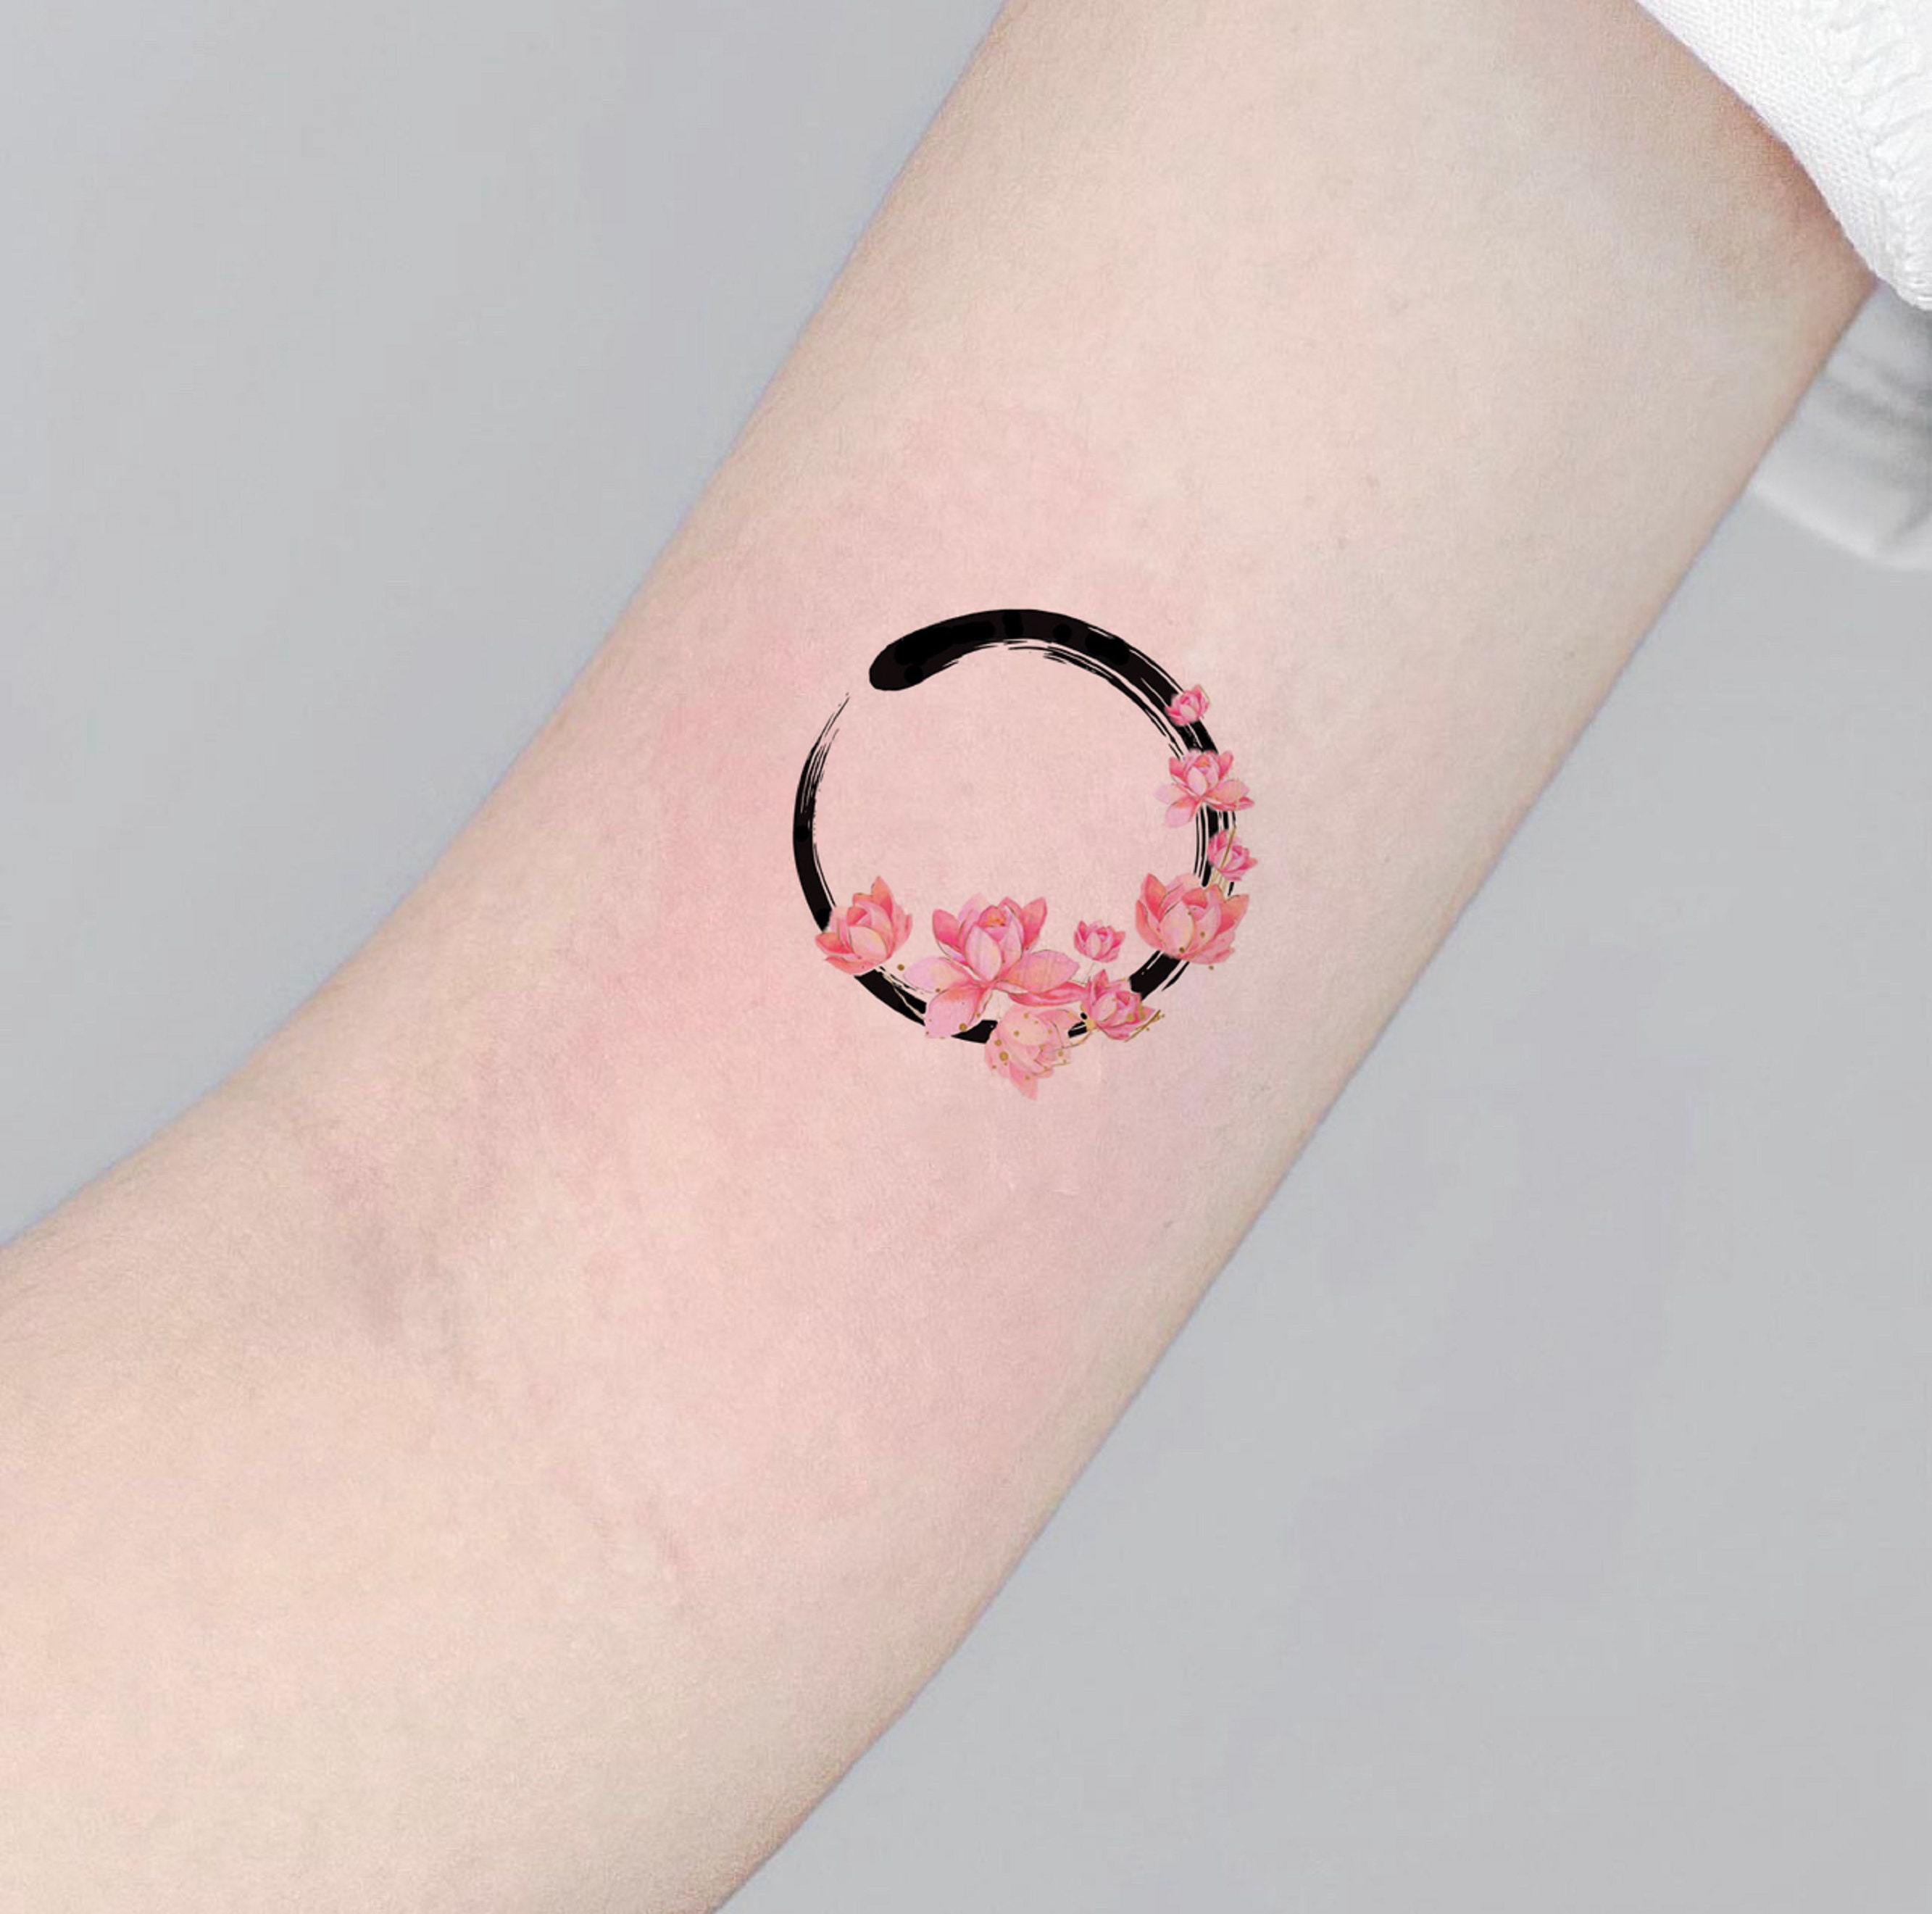 40 Insanely Gorgeous Circle Tattoo Designs - Page 2 of 2 - Bored Art